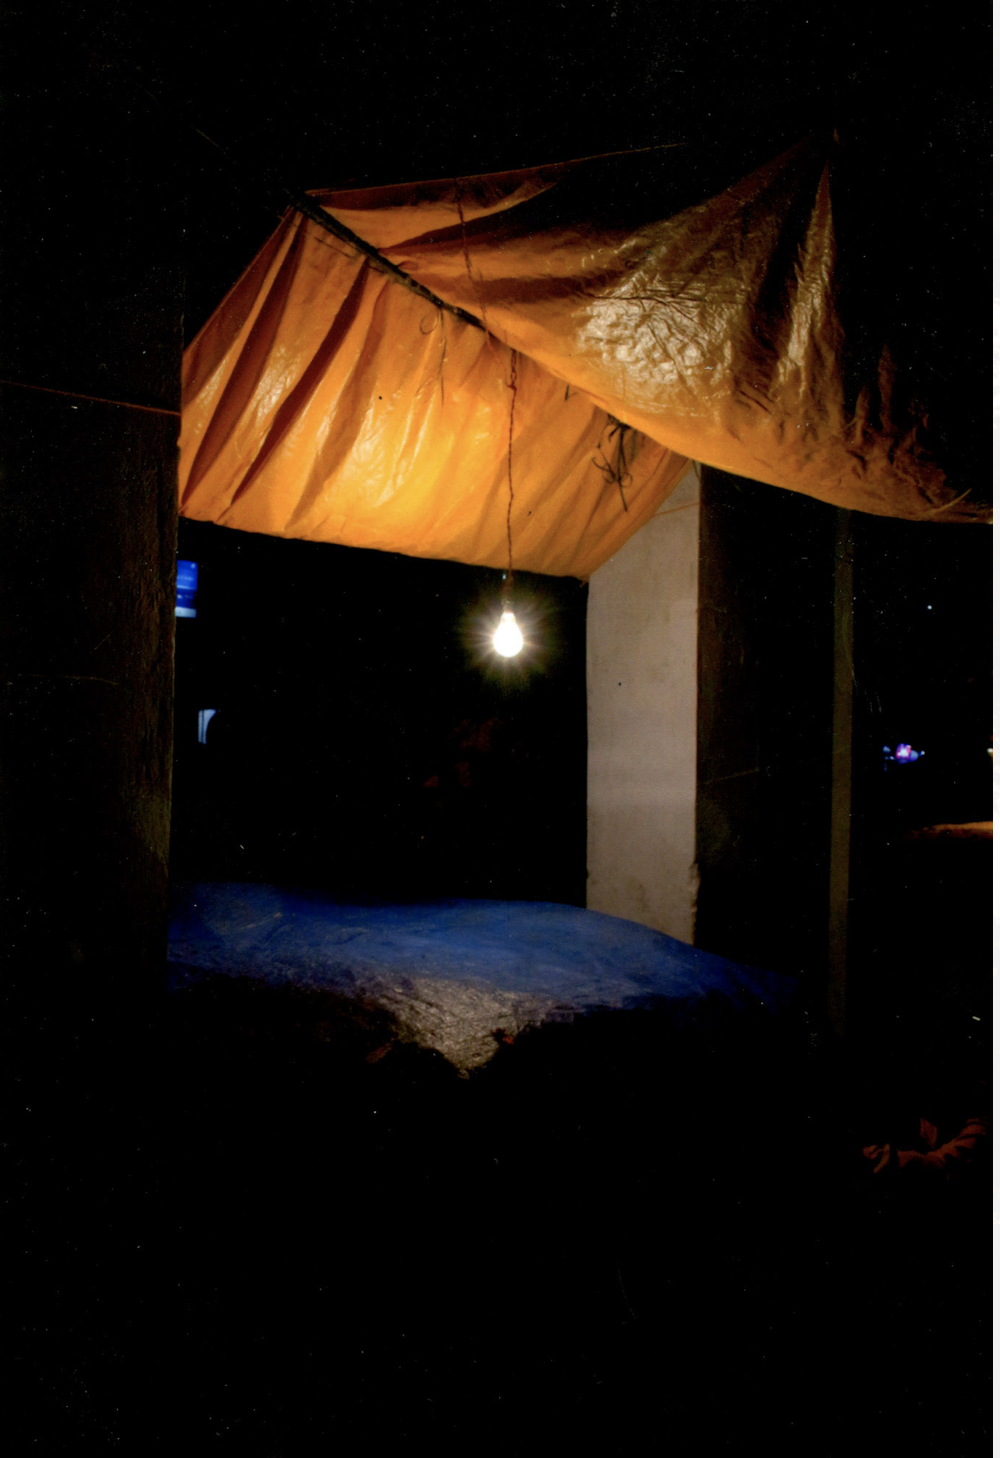 Copy of 1  - Emeline's Tent Image.png